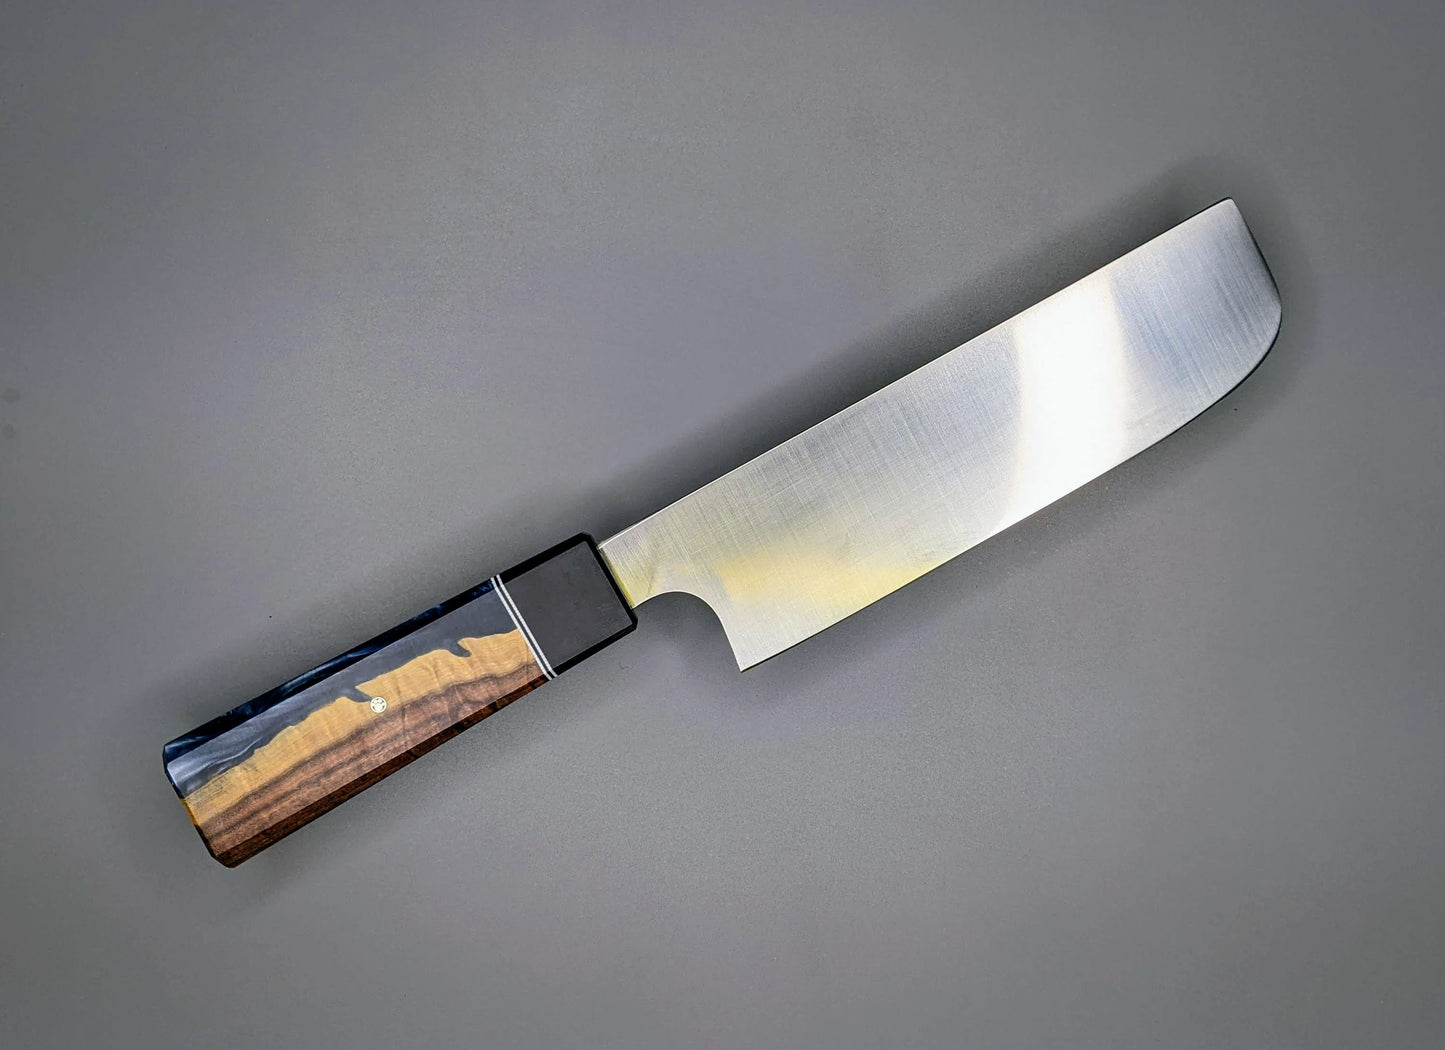 Japanese kitchen knife with wood and resin hybrid handle